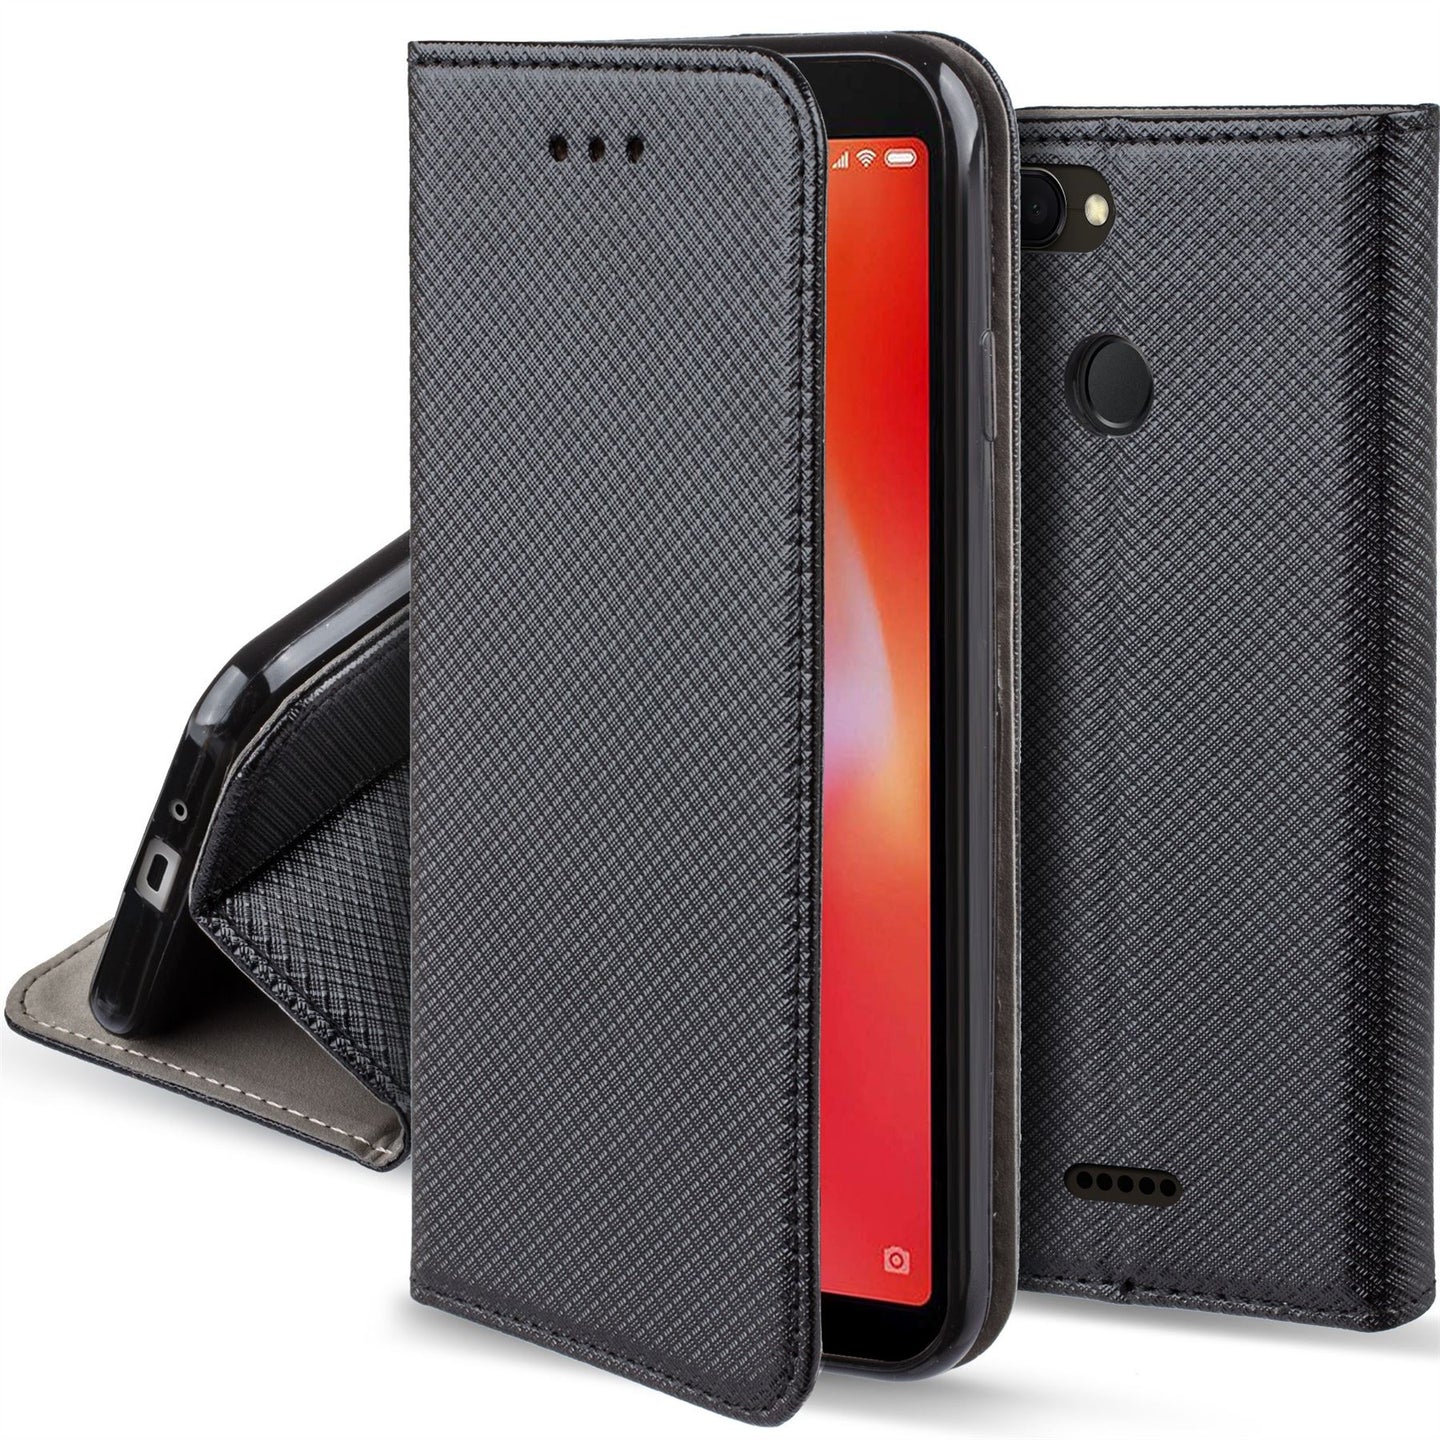 Moozy Case Flip Cover for Xiaomi Redmi 6, Black - Smart Magnetic Flip Case with Card Holder and Stand